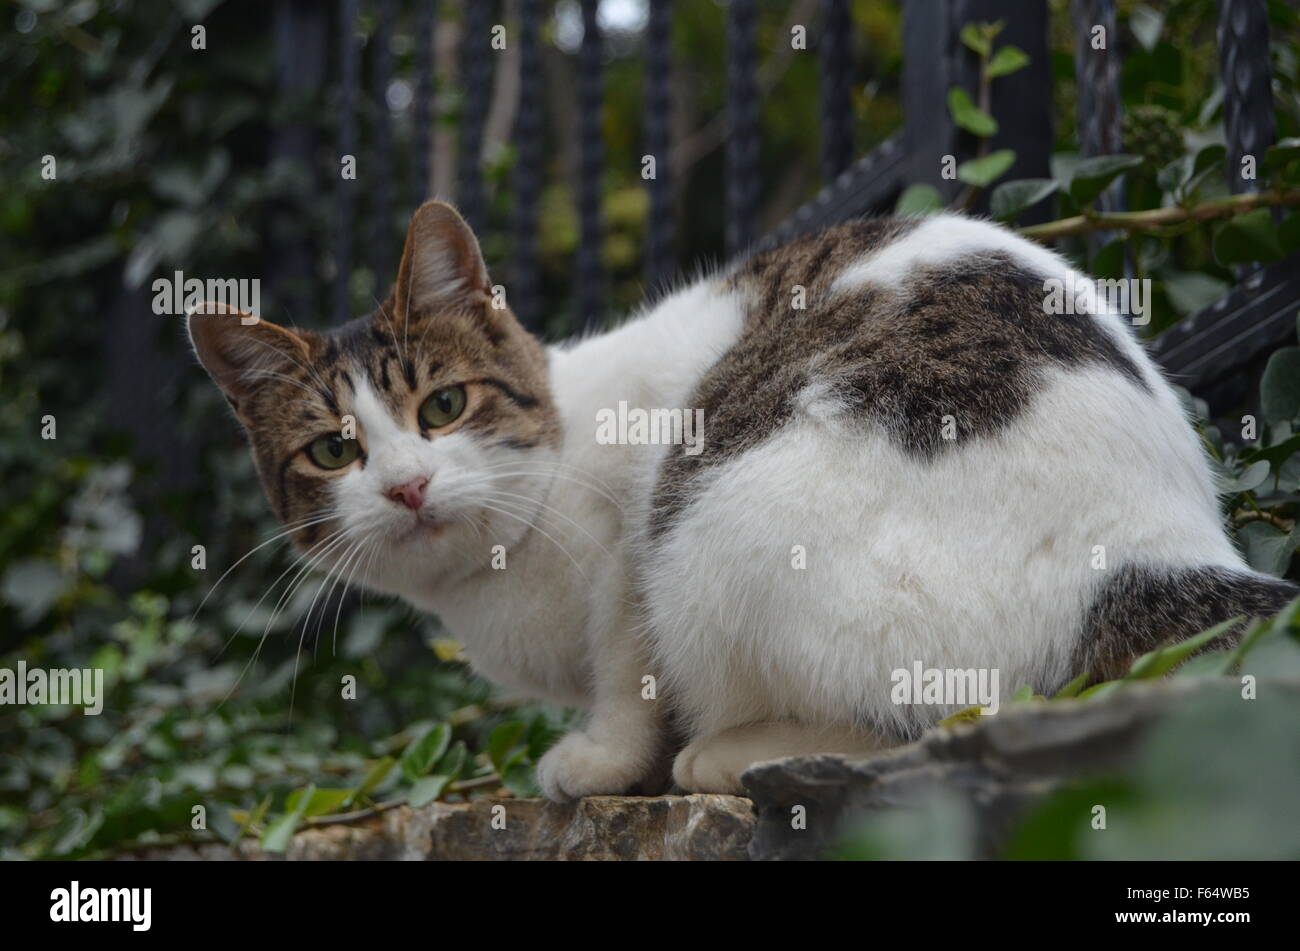 Innocent looking cat on the wall Stock Photo